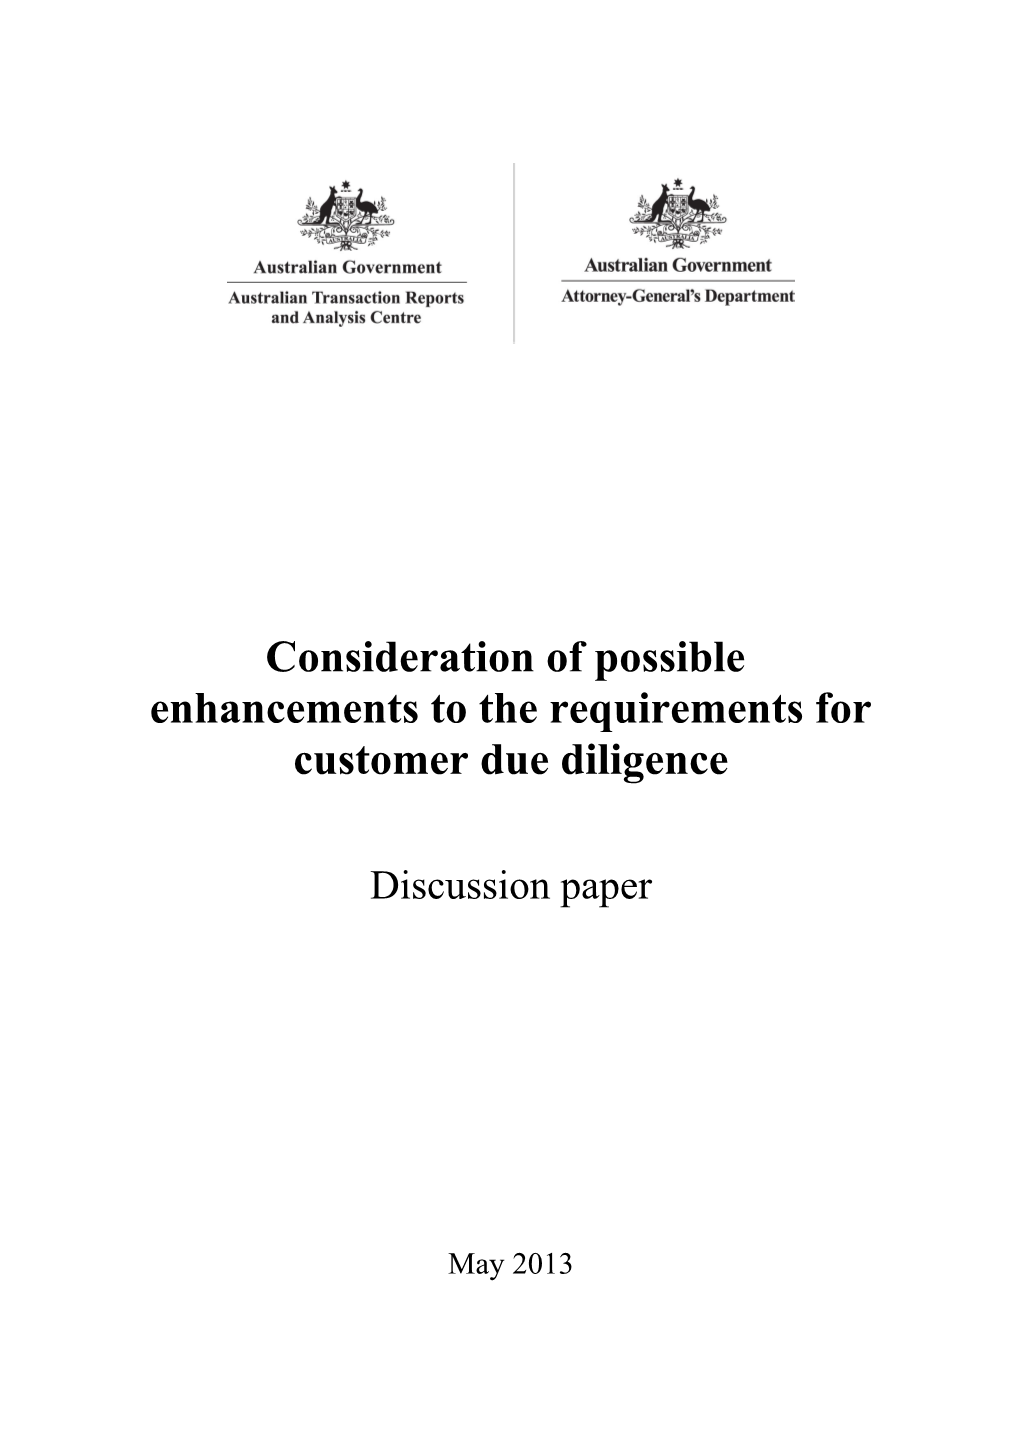 Consultation Paper Consideration of Possible Enhancements to the Requirements for Customer